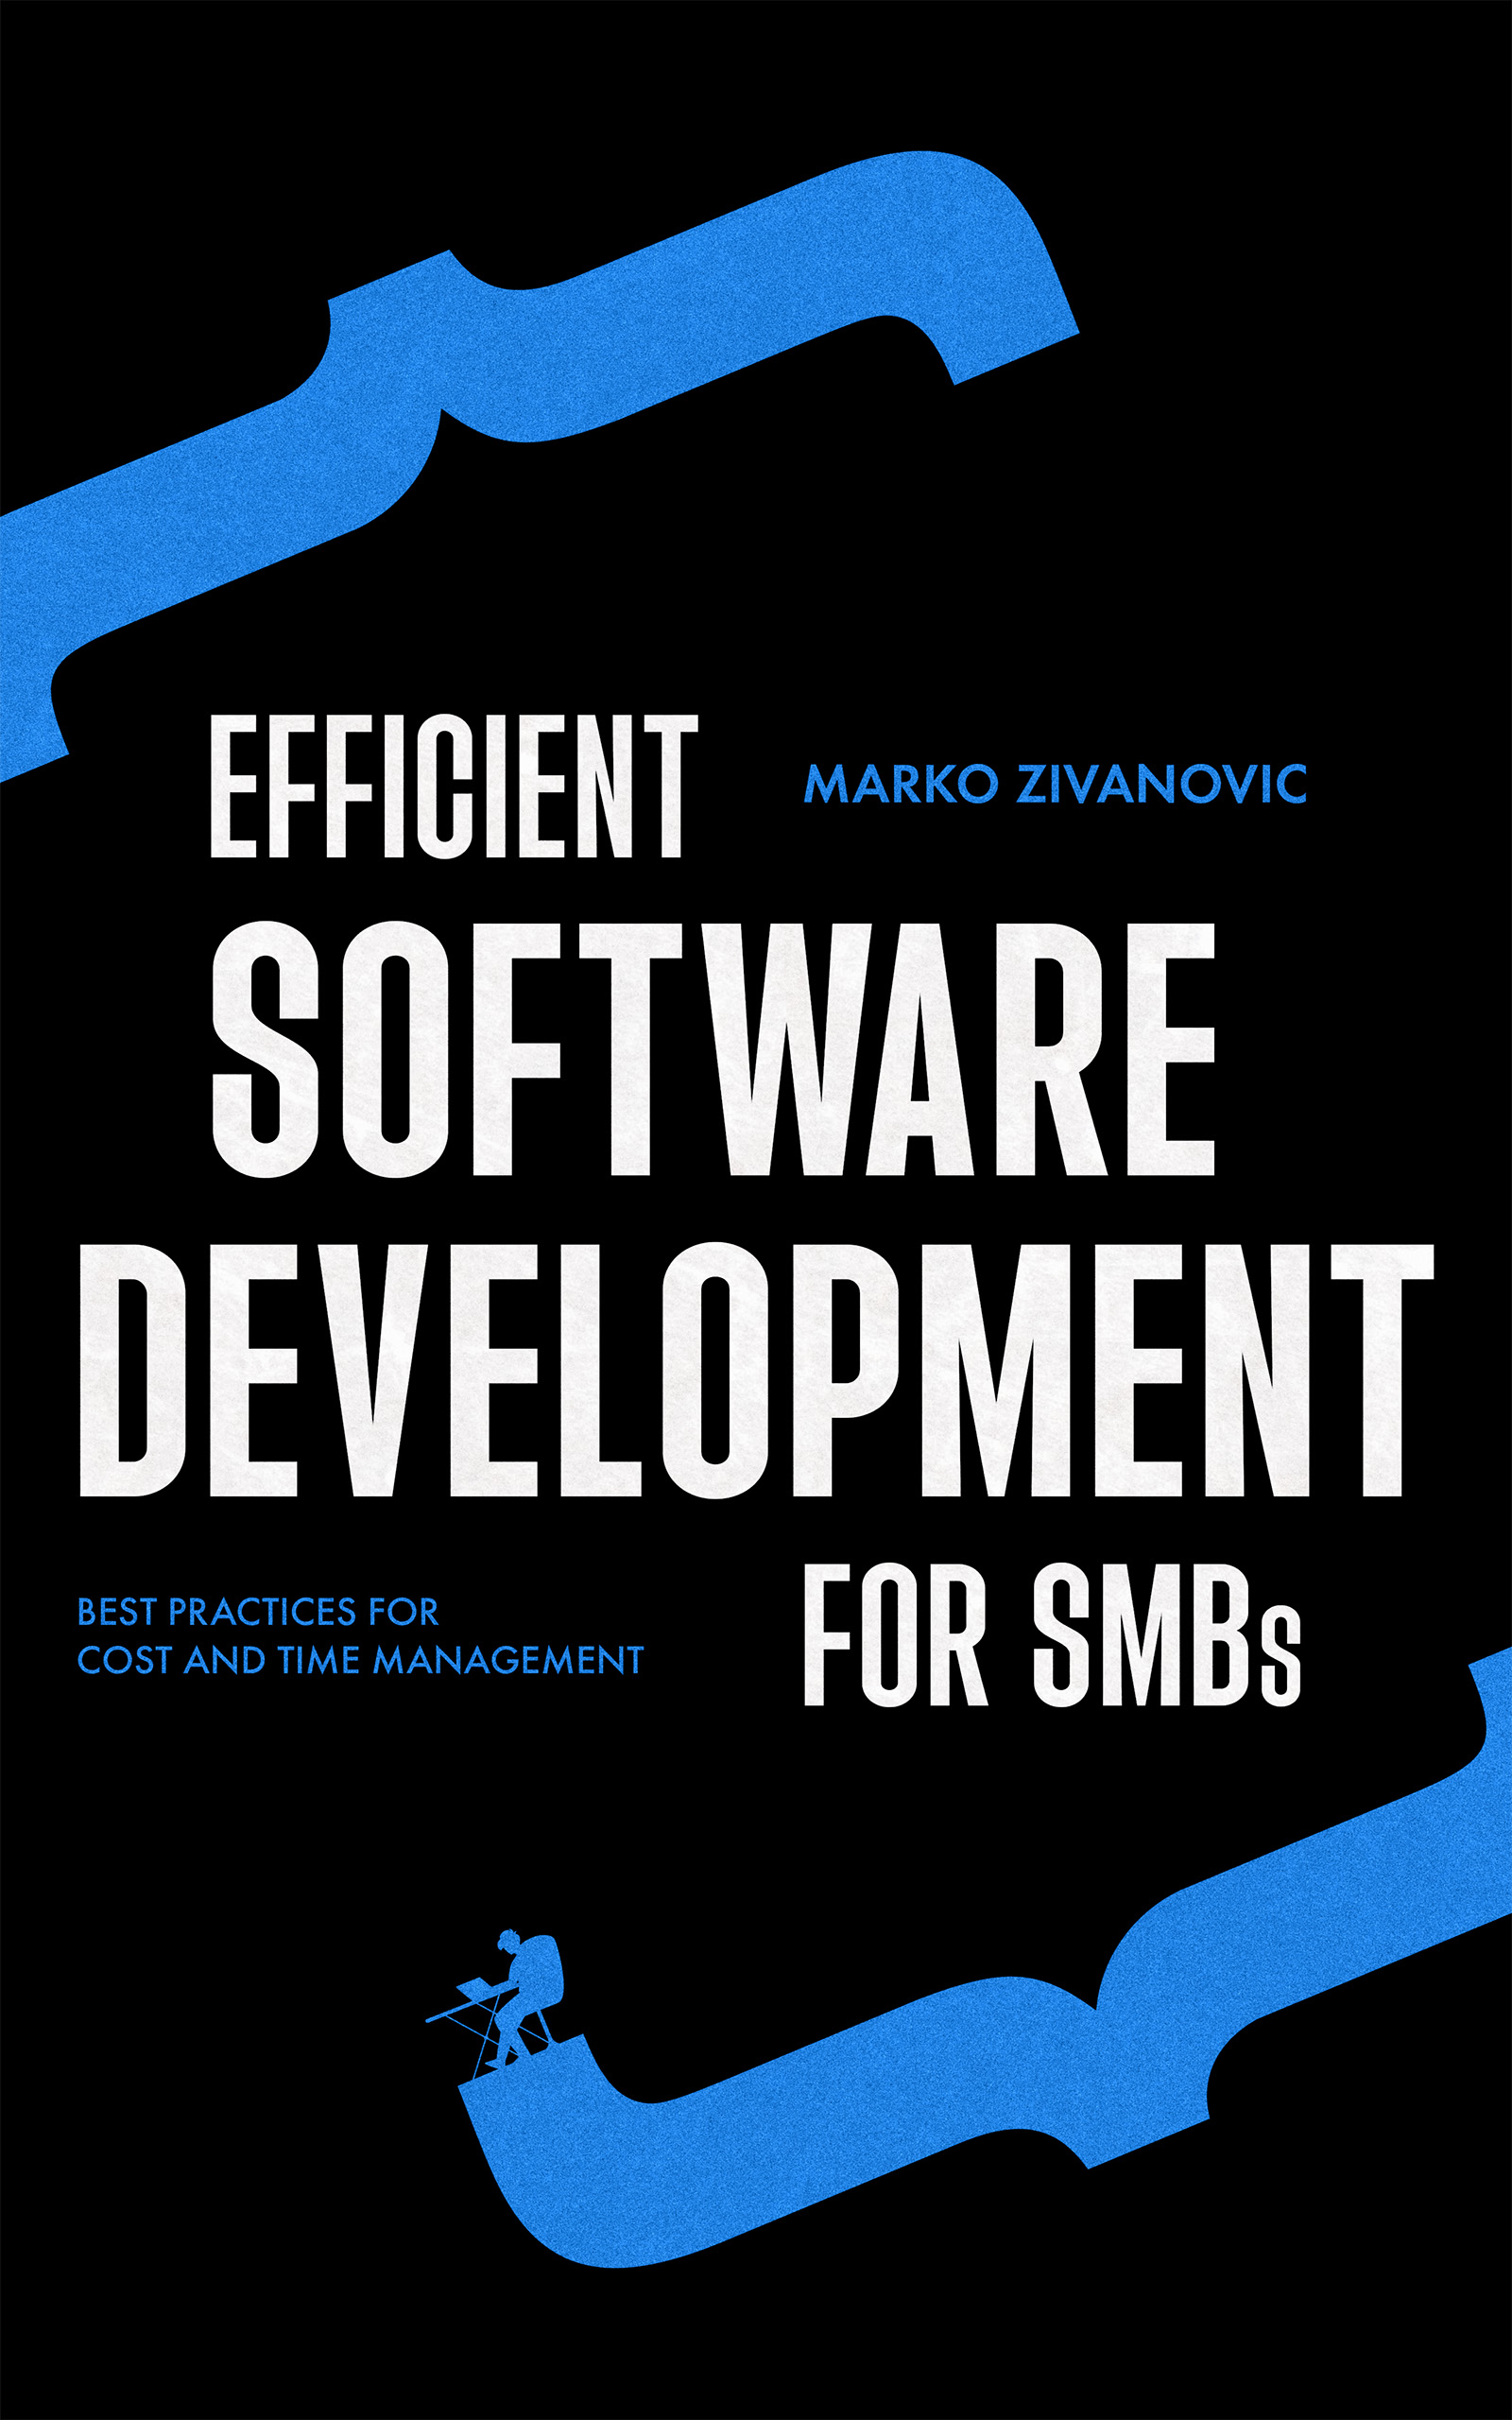 Efficient Software Development for SMBs book cover